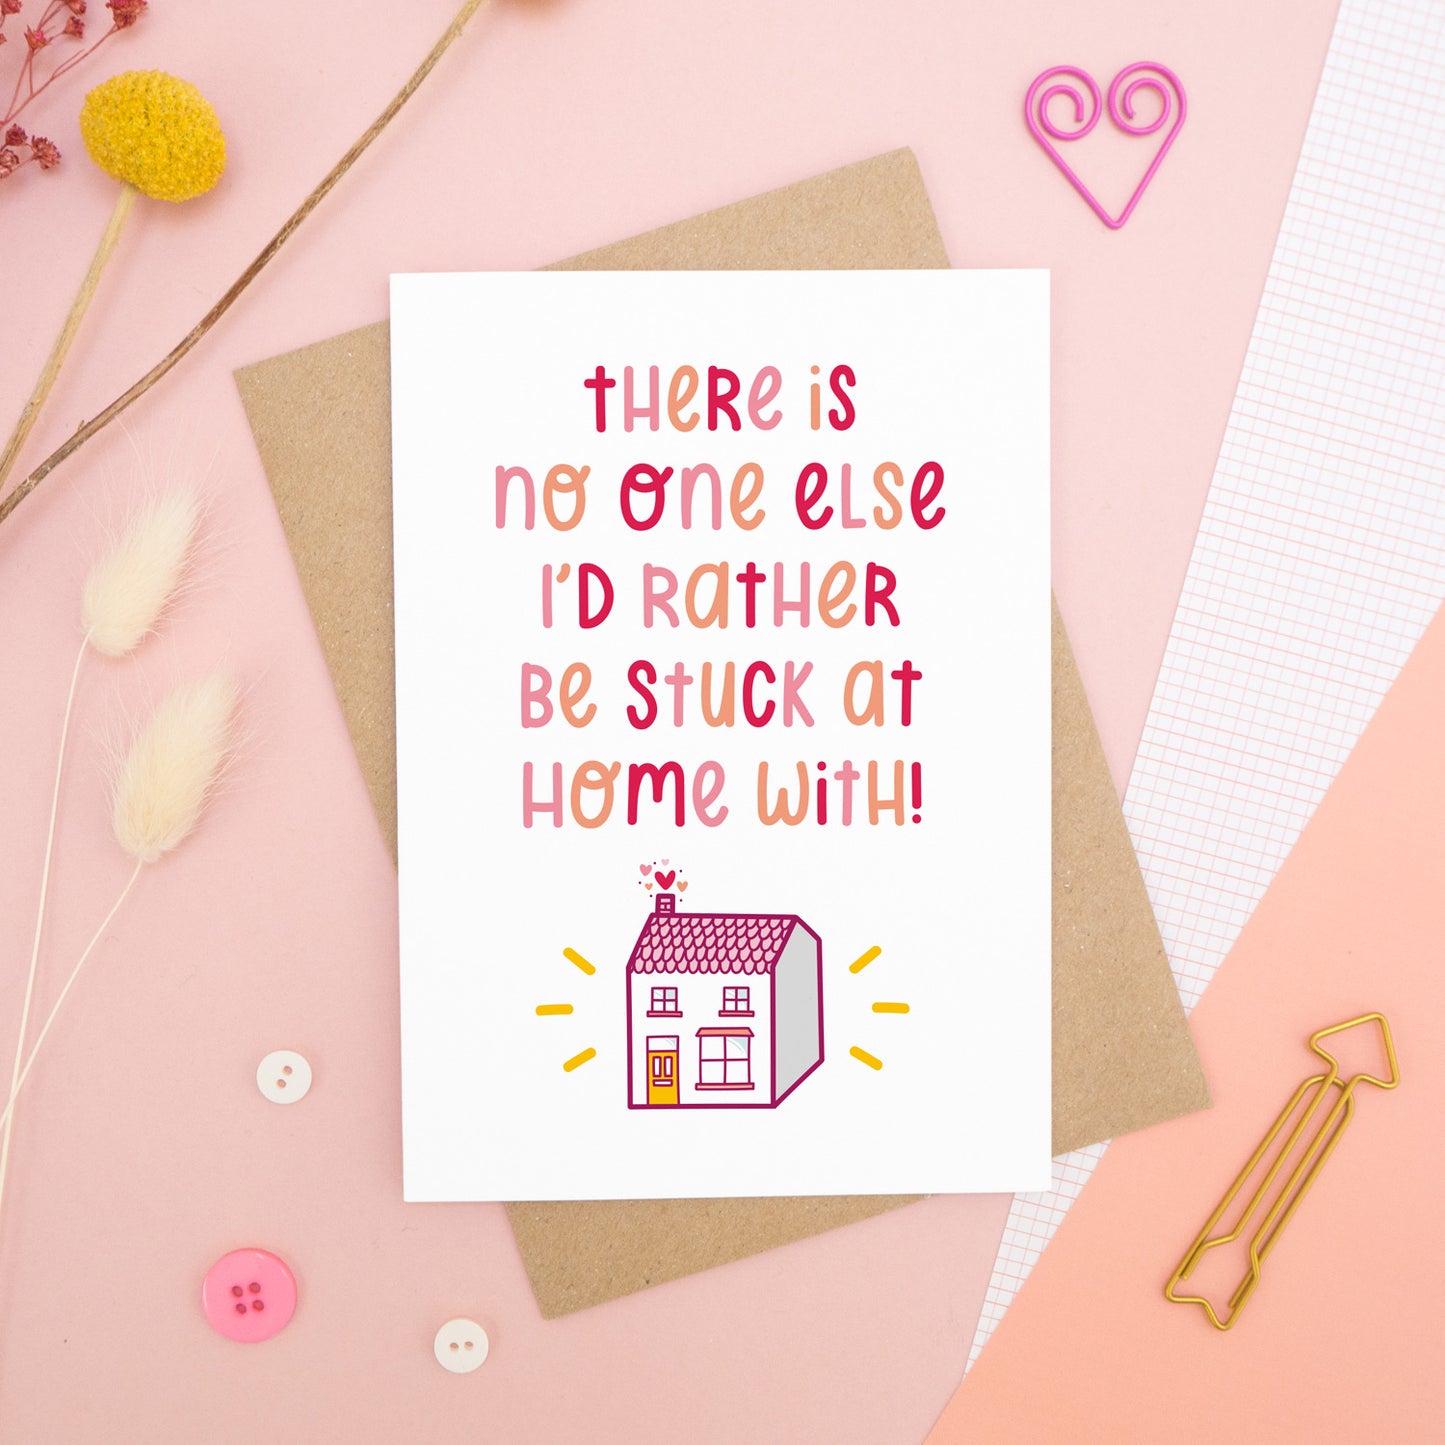 The 'stuck at home with you' card photographed on a pink background with dried flowers, buttons and paper clips as props.